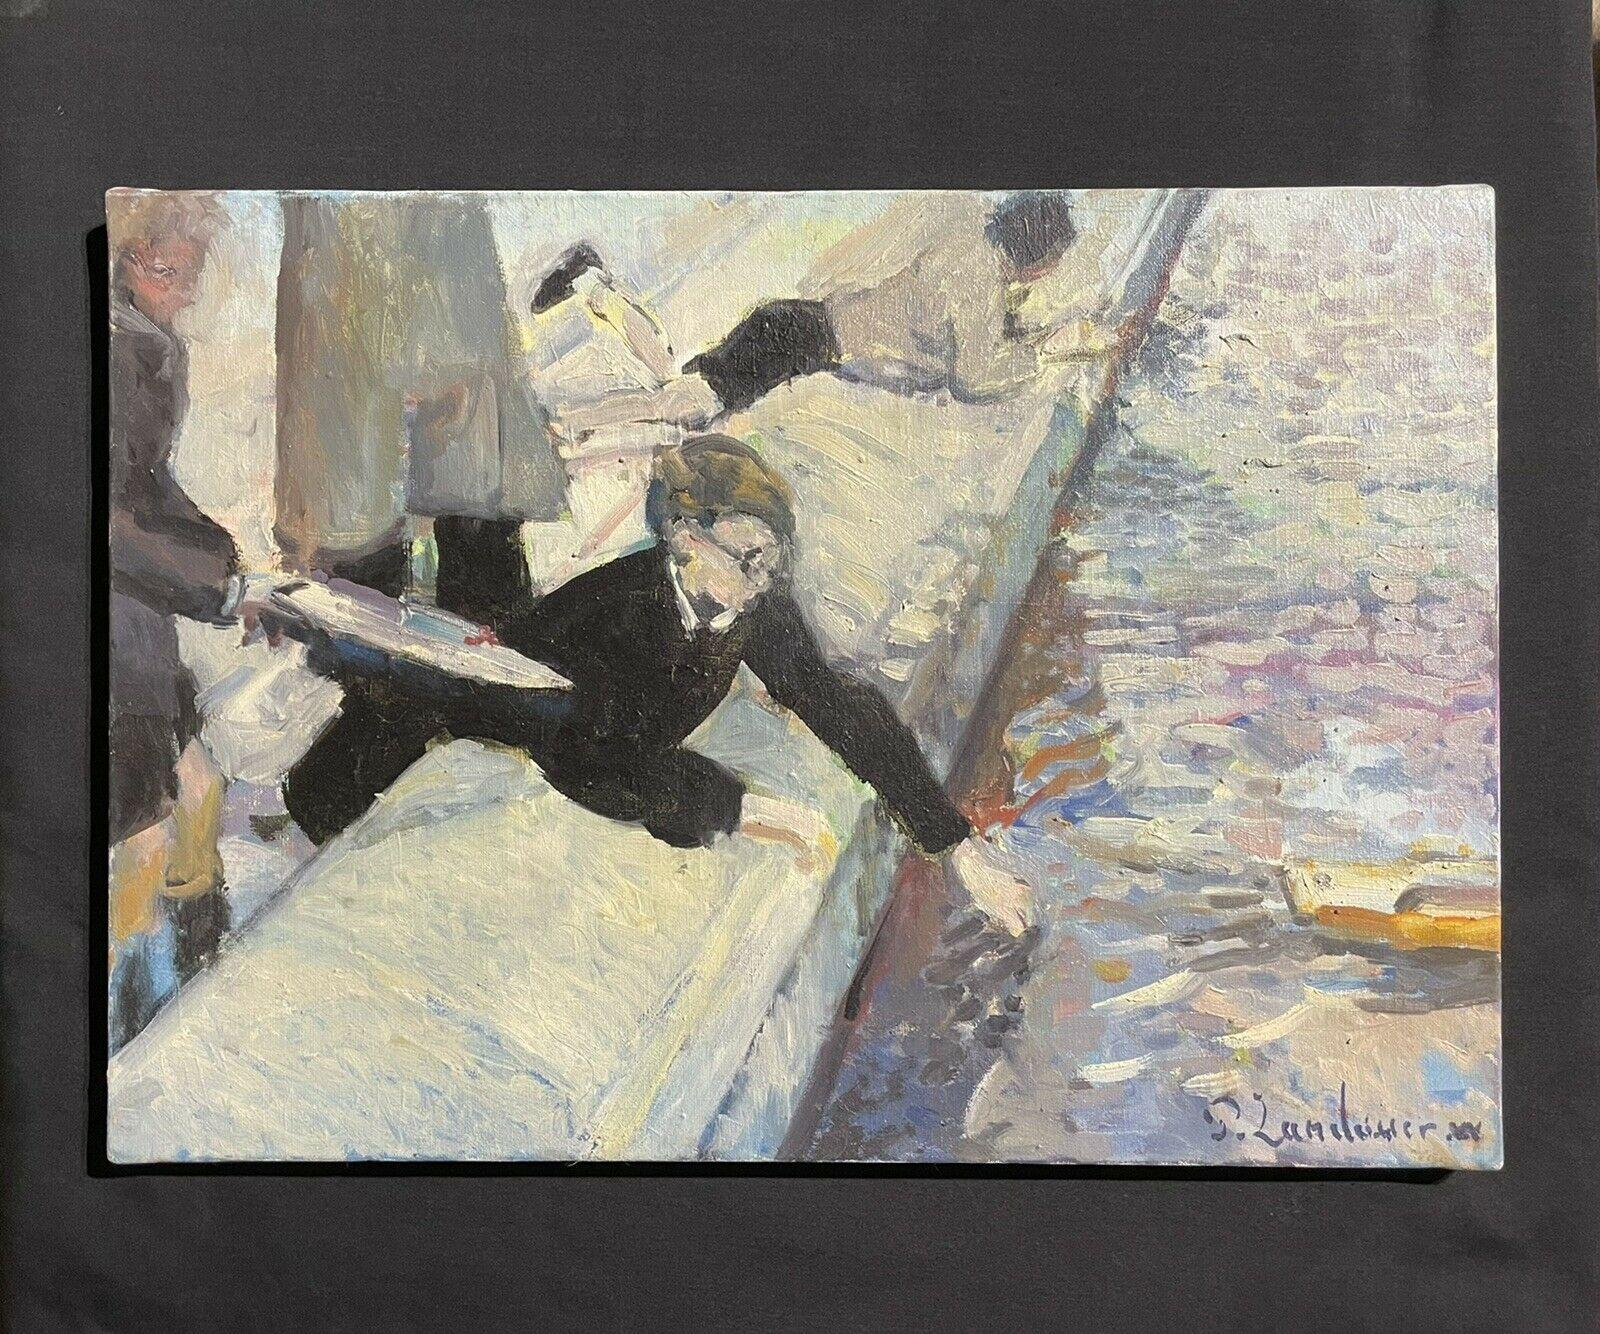 FRENCH IMPRESSIONIST SIGNED OIL - PLAYING WITH TOY BOATS ON CITY POND IN PARIS - Painting by Patrice Landauer